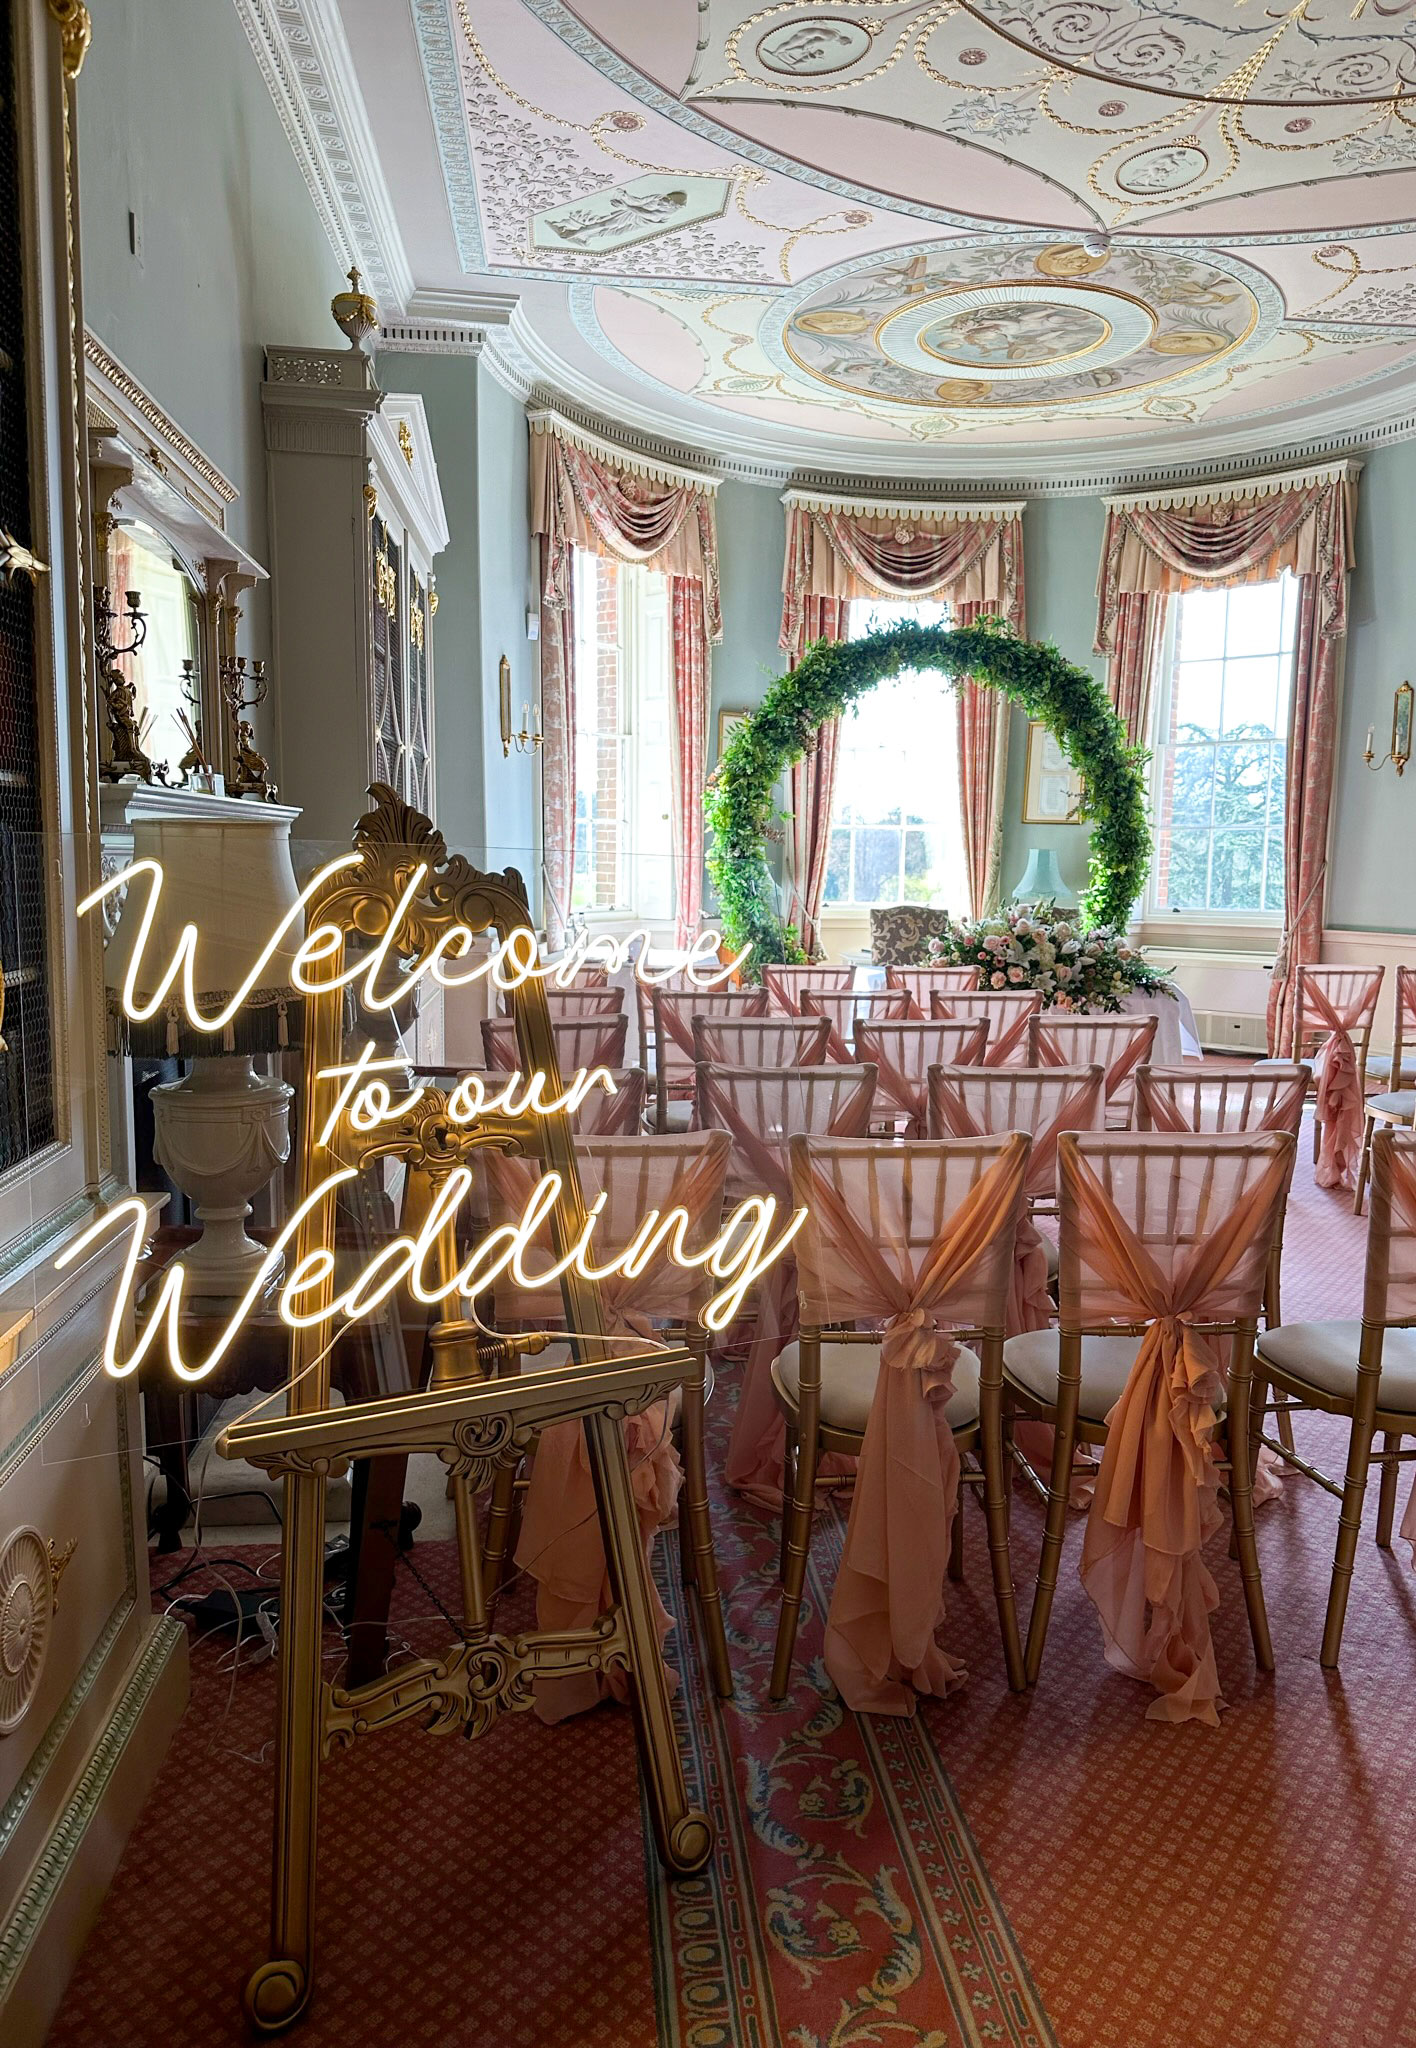 Welcome To Our Wedding Neon